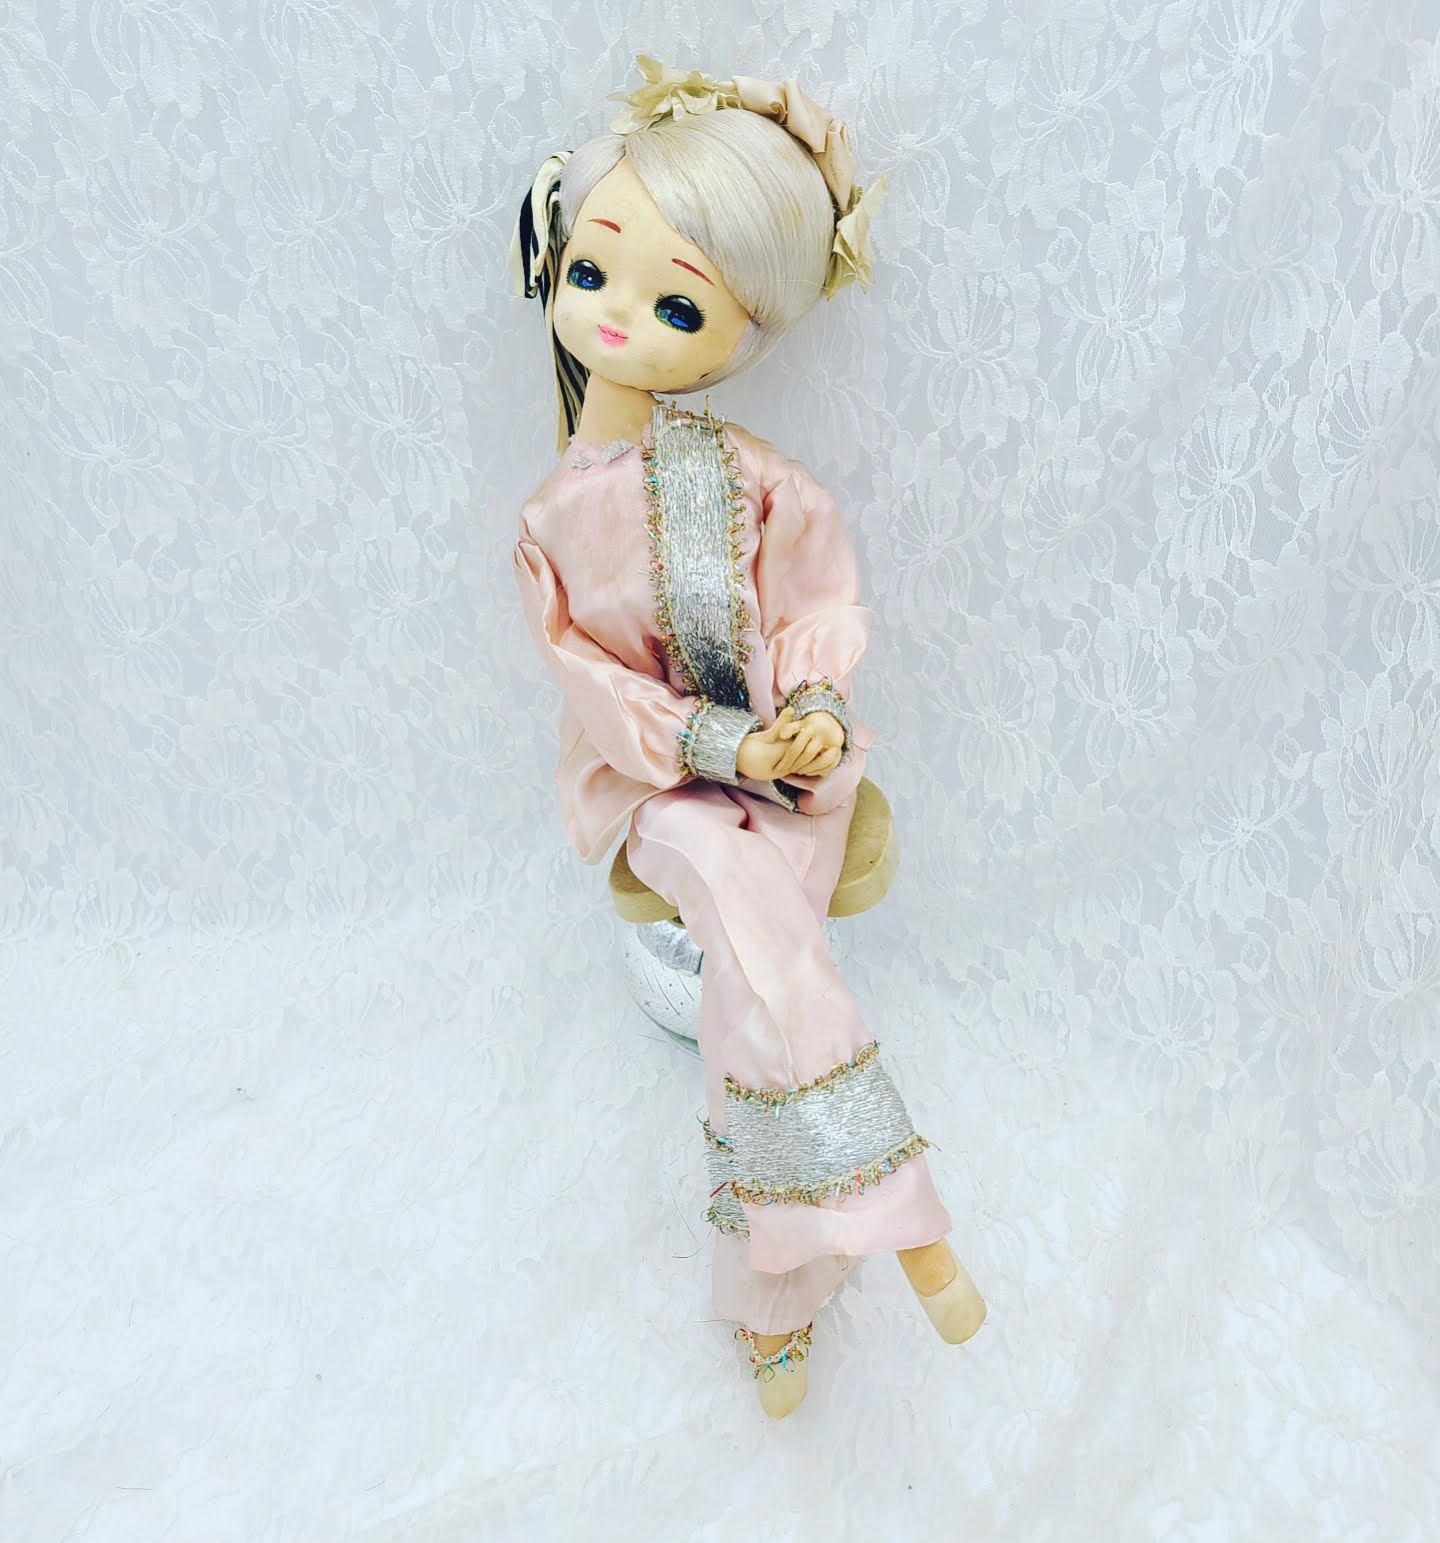 Veronika Haunted Doll ~17" Stockinette 1960s Doll ~ Paranormal ~ Very Active ~ Posh ~ Judgy ~ Wise, in Certain Ways